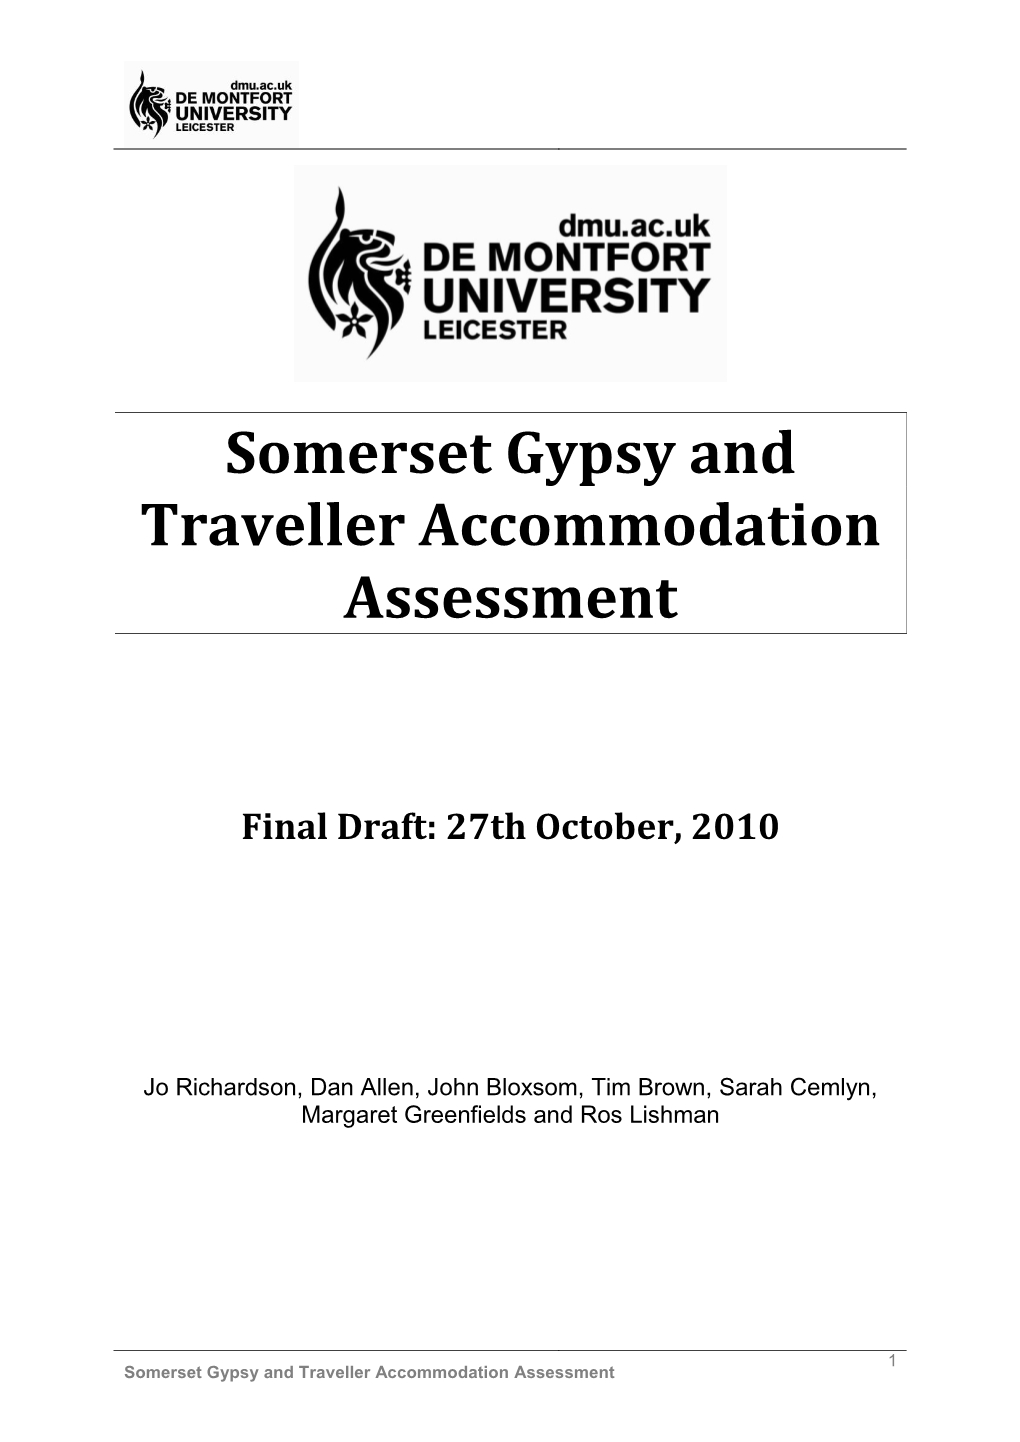 Gypsy and Traveller Accommodation Assessment